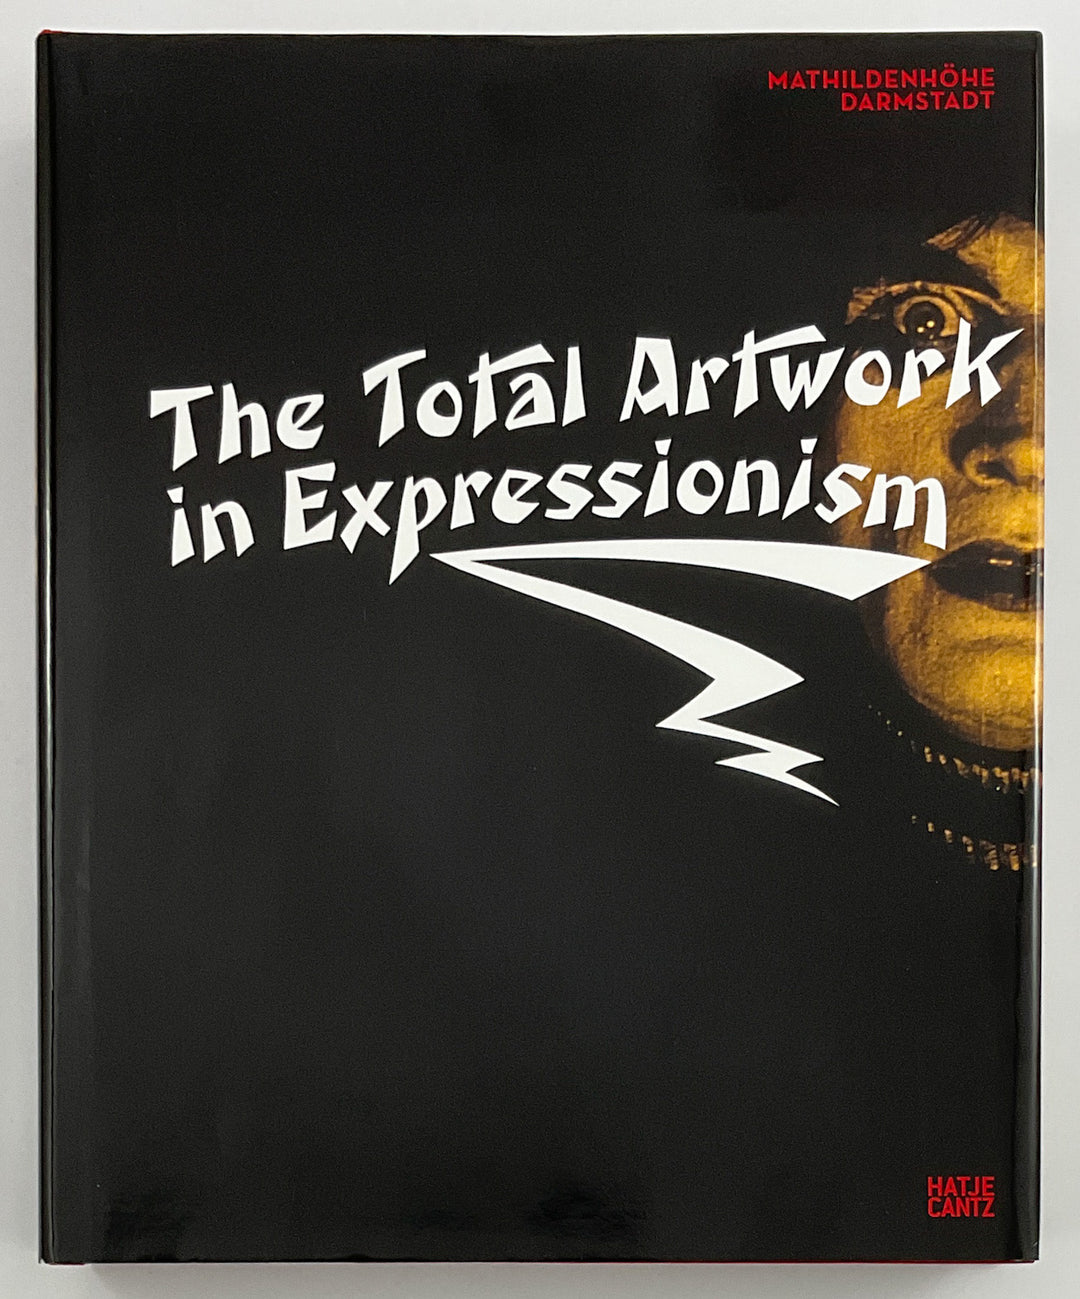 The Total Artwork in Expressionism: Art, Film, Literature, Theater, Dance, and Architecture, 1905-1925